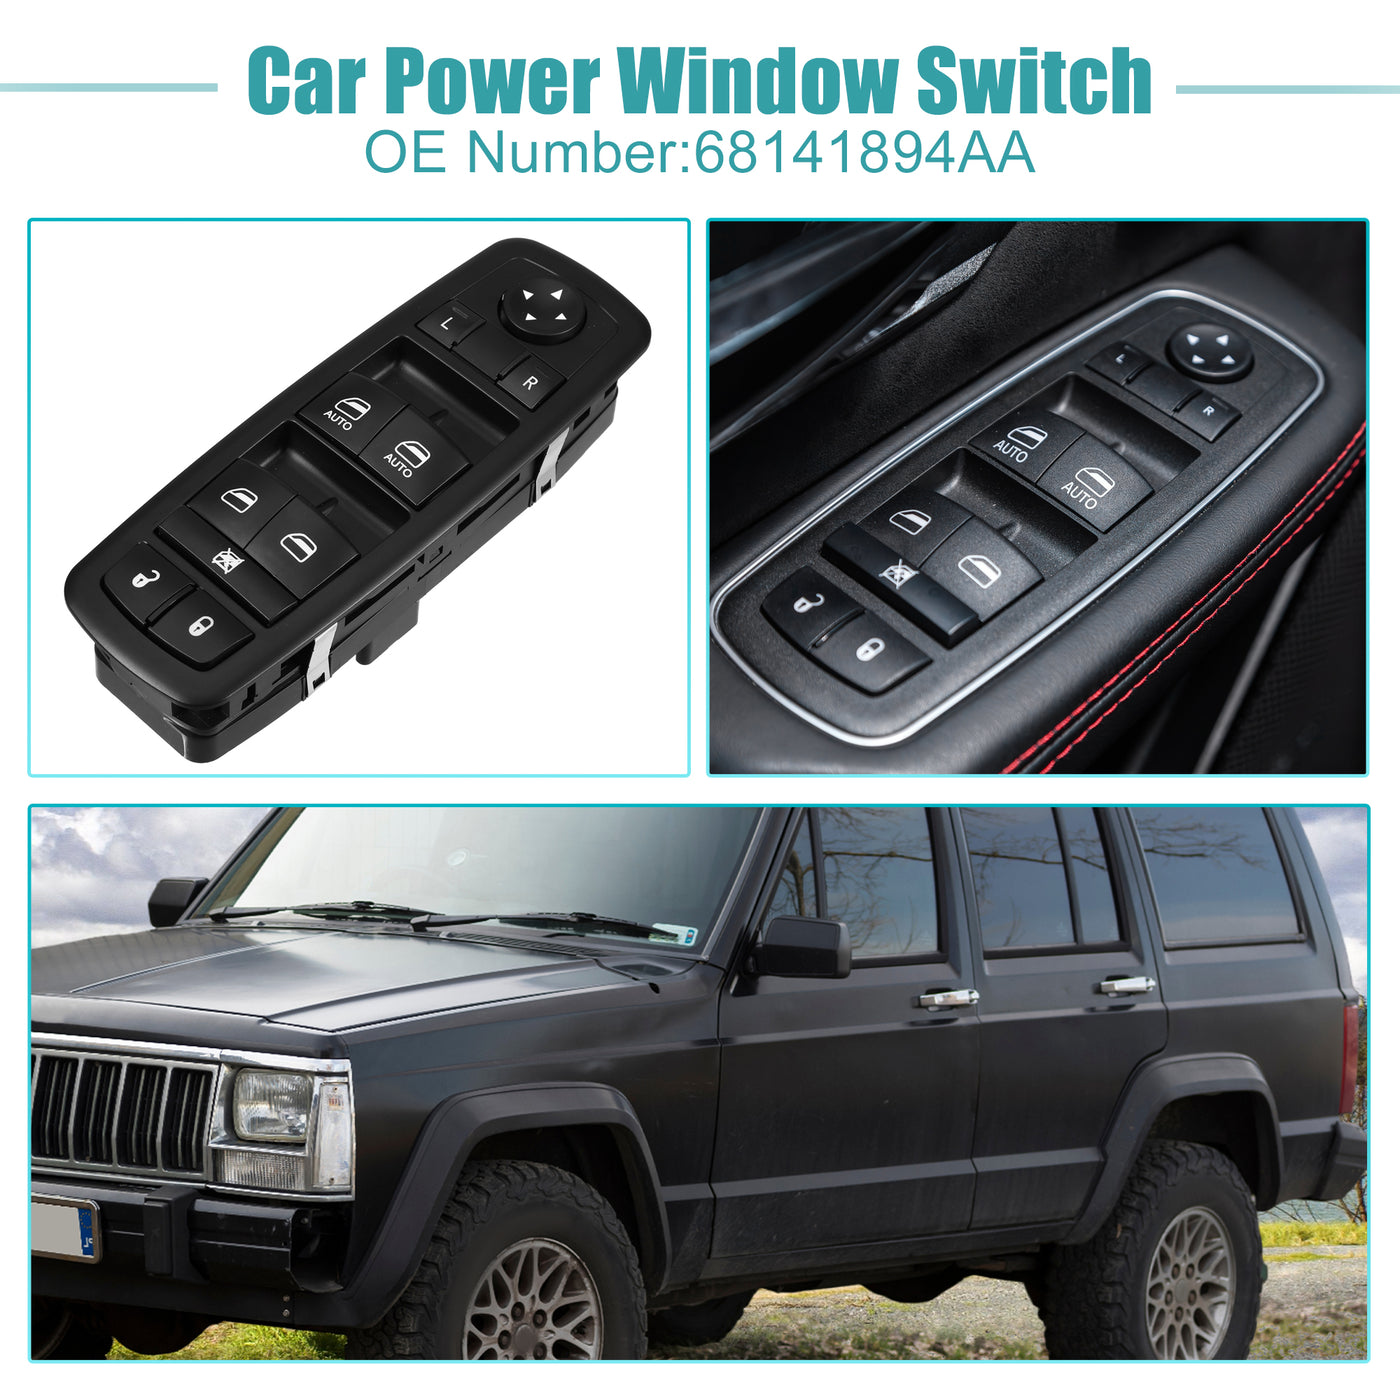 ACROPIX Power Window Switch Window Control Switch Fit for Jeep Cherokee 2014 with Removal Tool No.68141894AA - Pack of 1